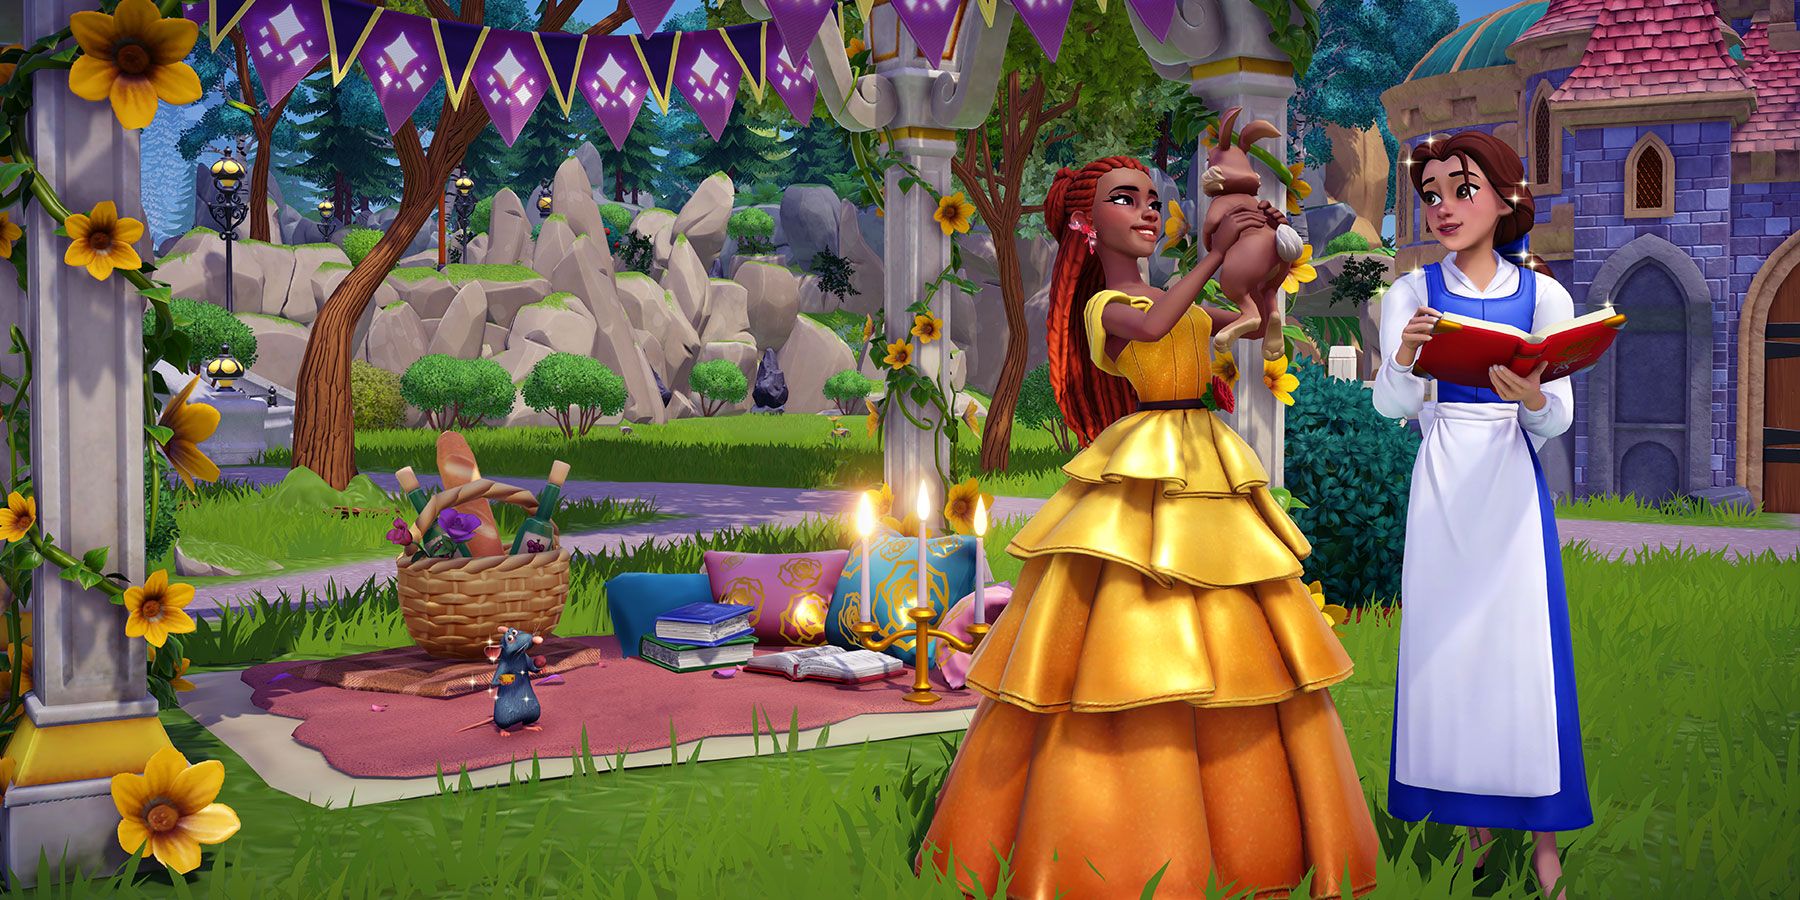 Spending time with villagers in Disney Dreamlight Valley.